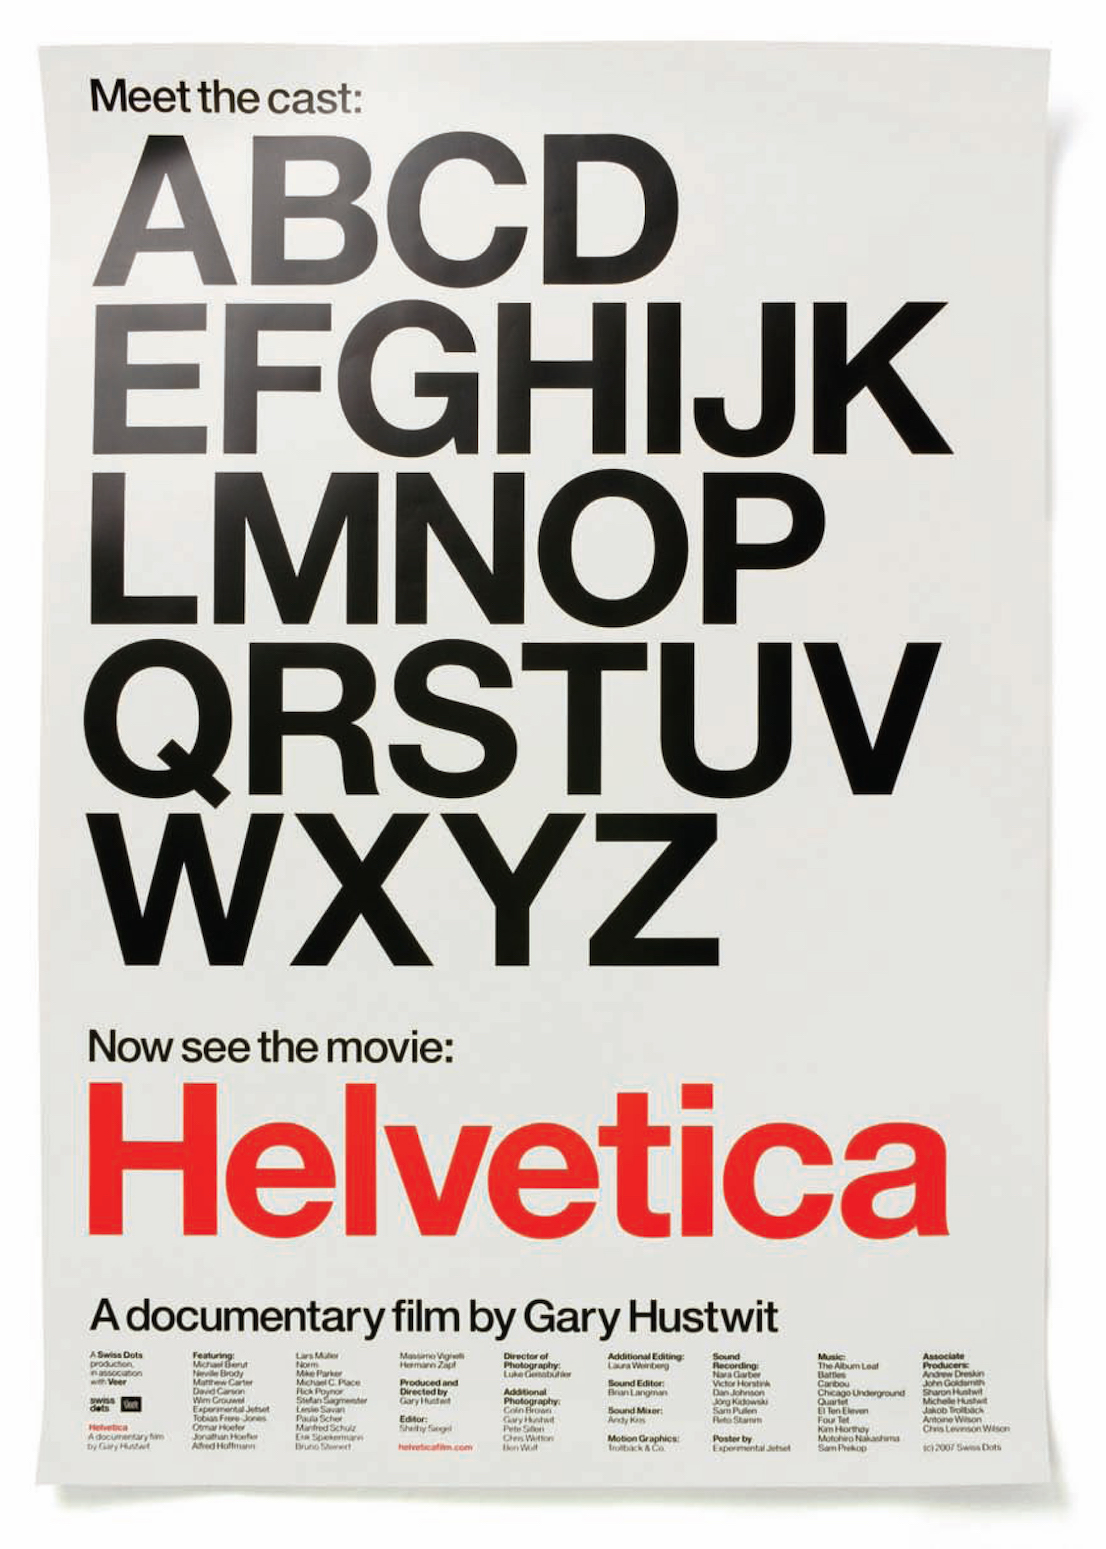 “Meet The Cast”, film poster for Helvetica, 2007.